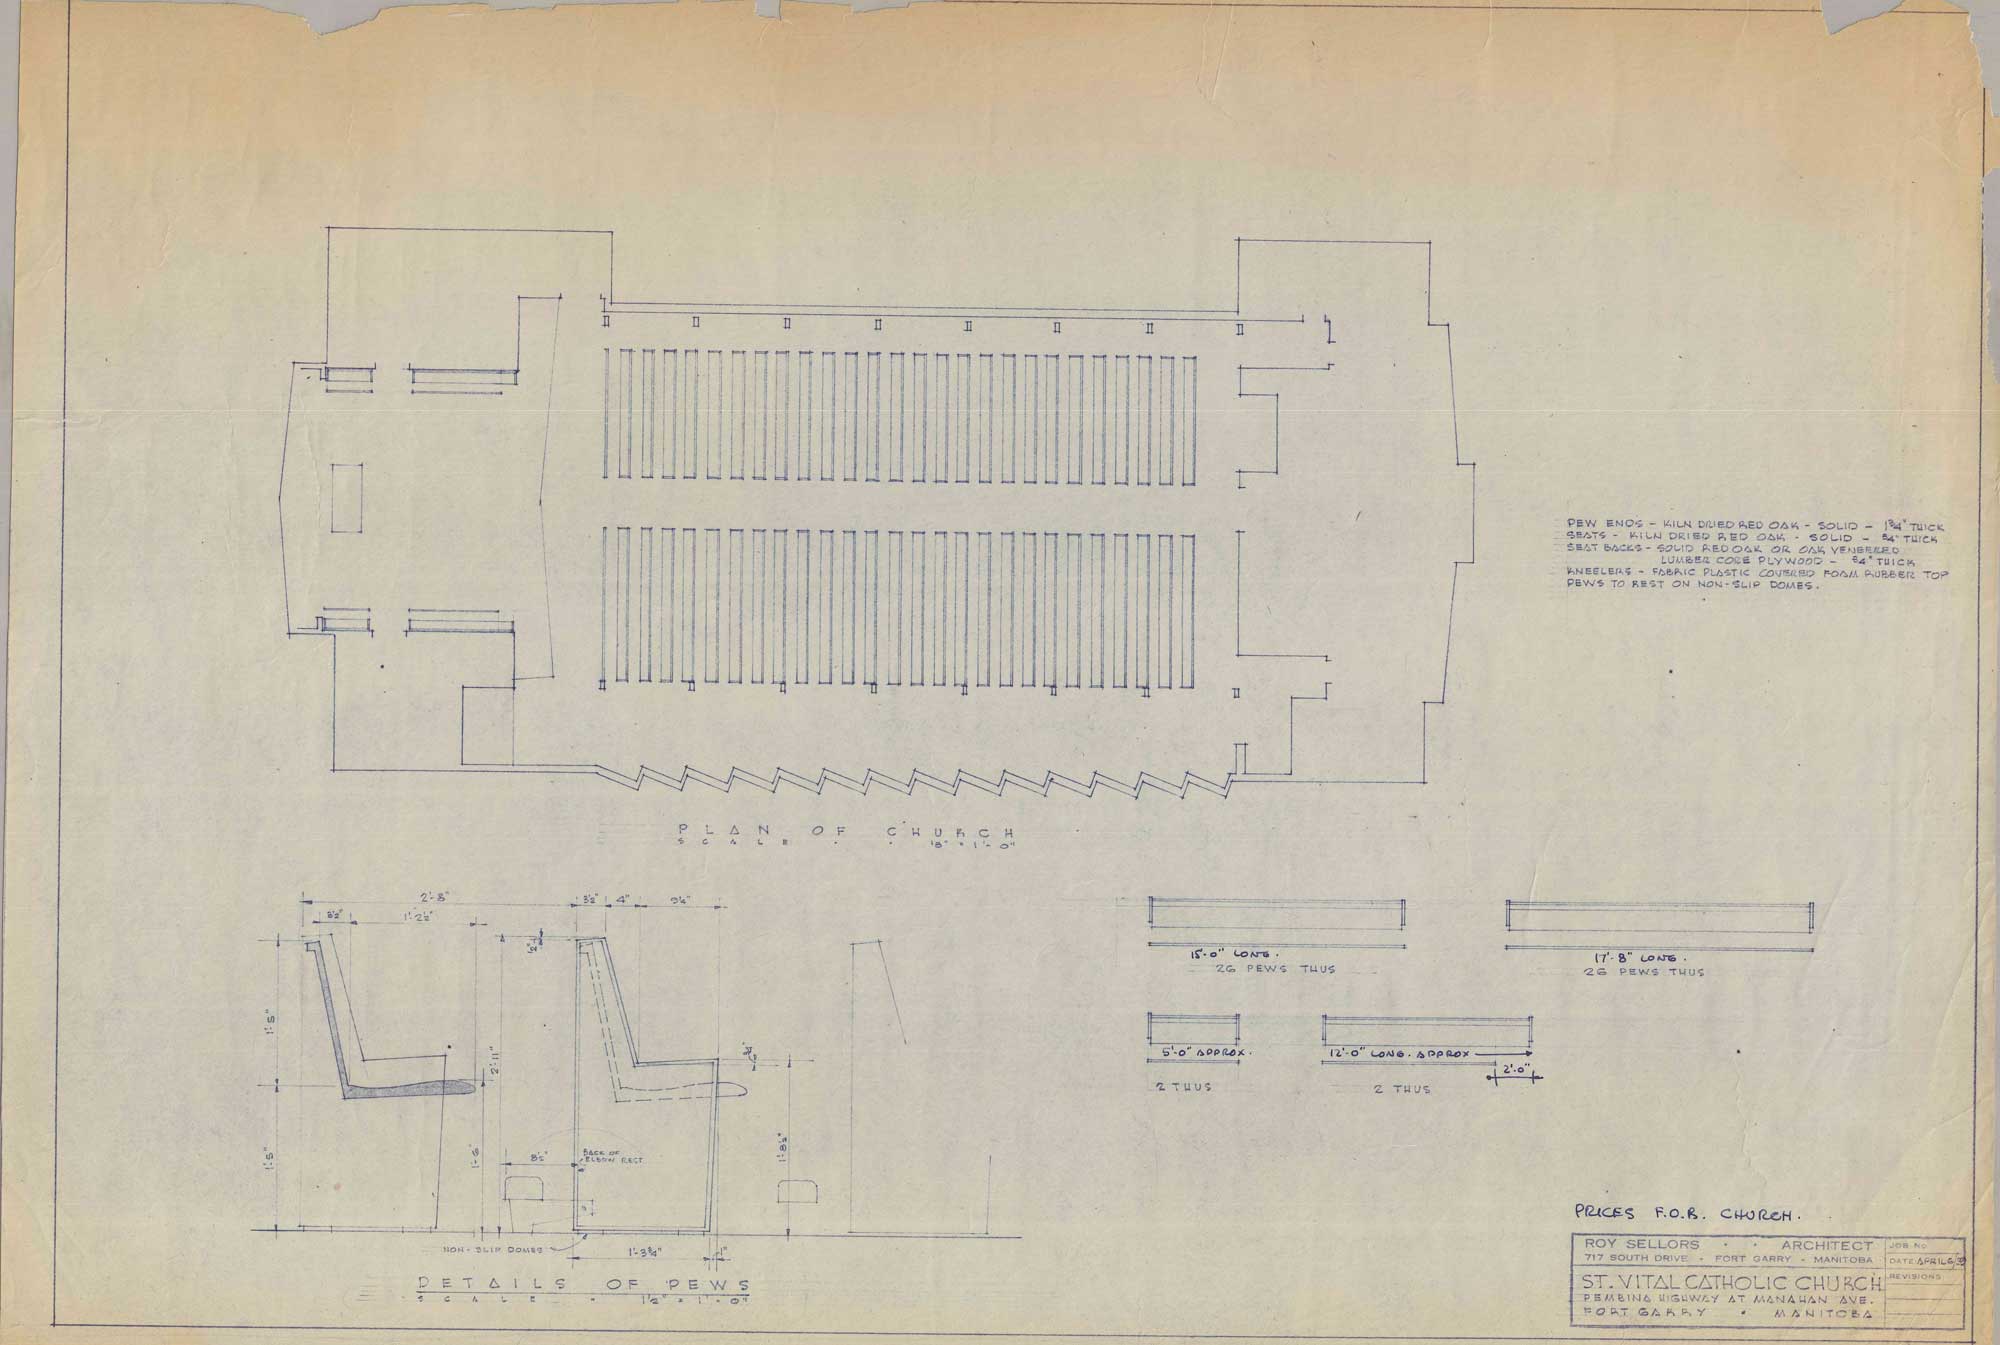 Image shows a drawing of St. Vital Church's main floor plan. On the lower lefthand corner, there are profile sketches of pews.